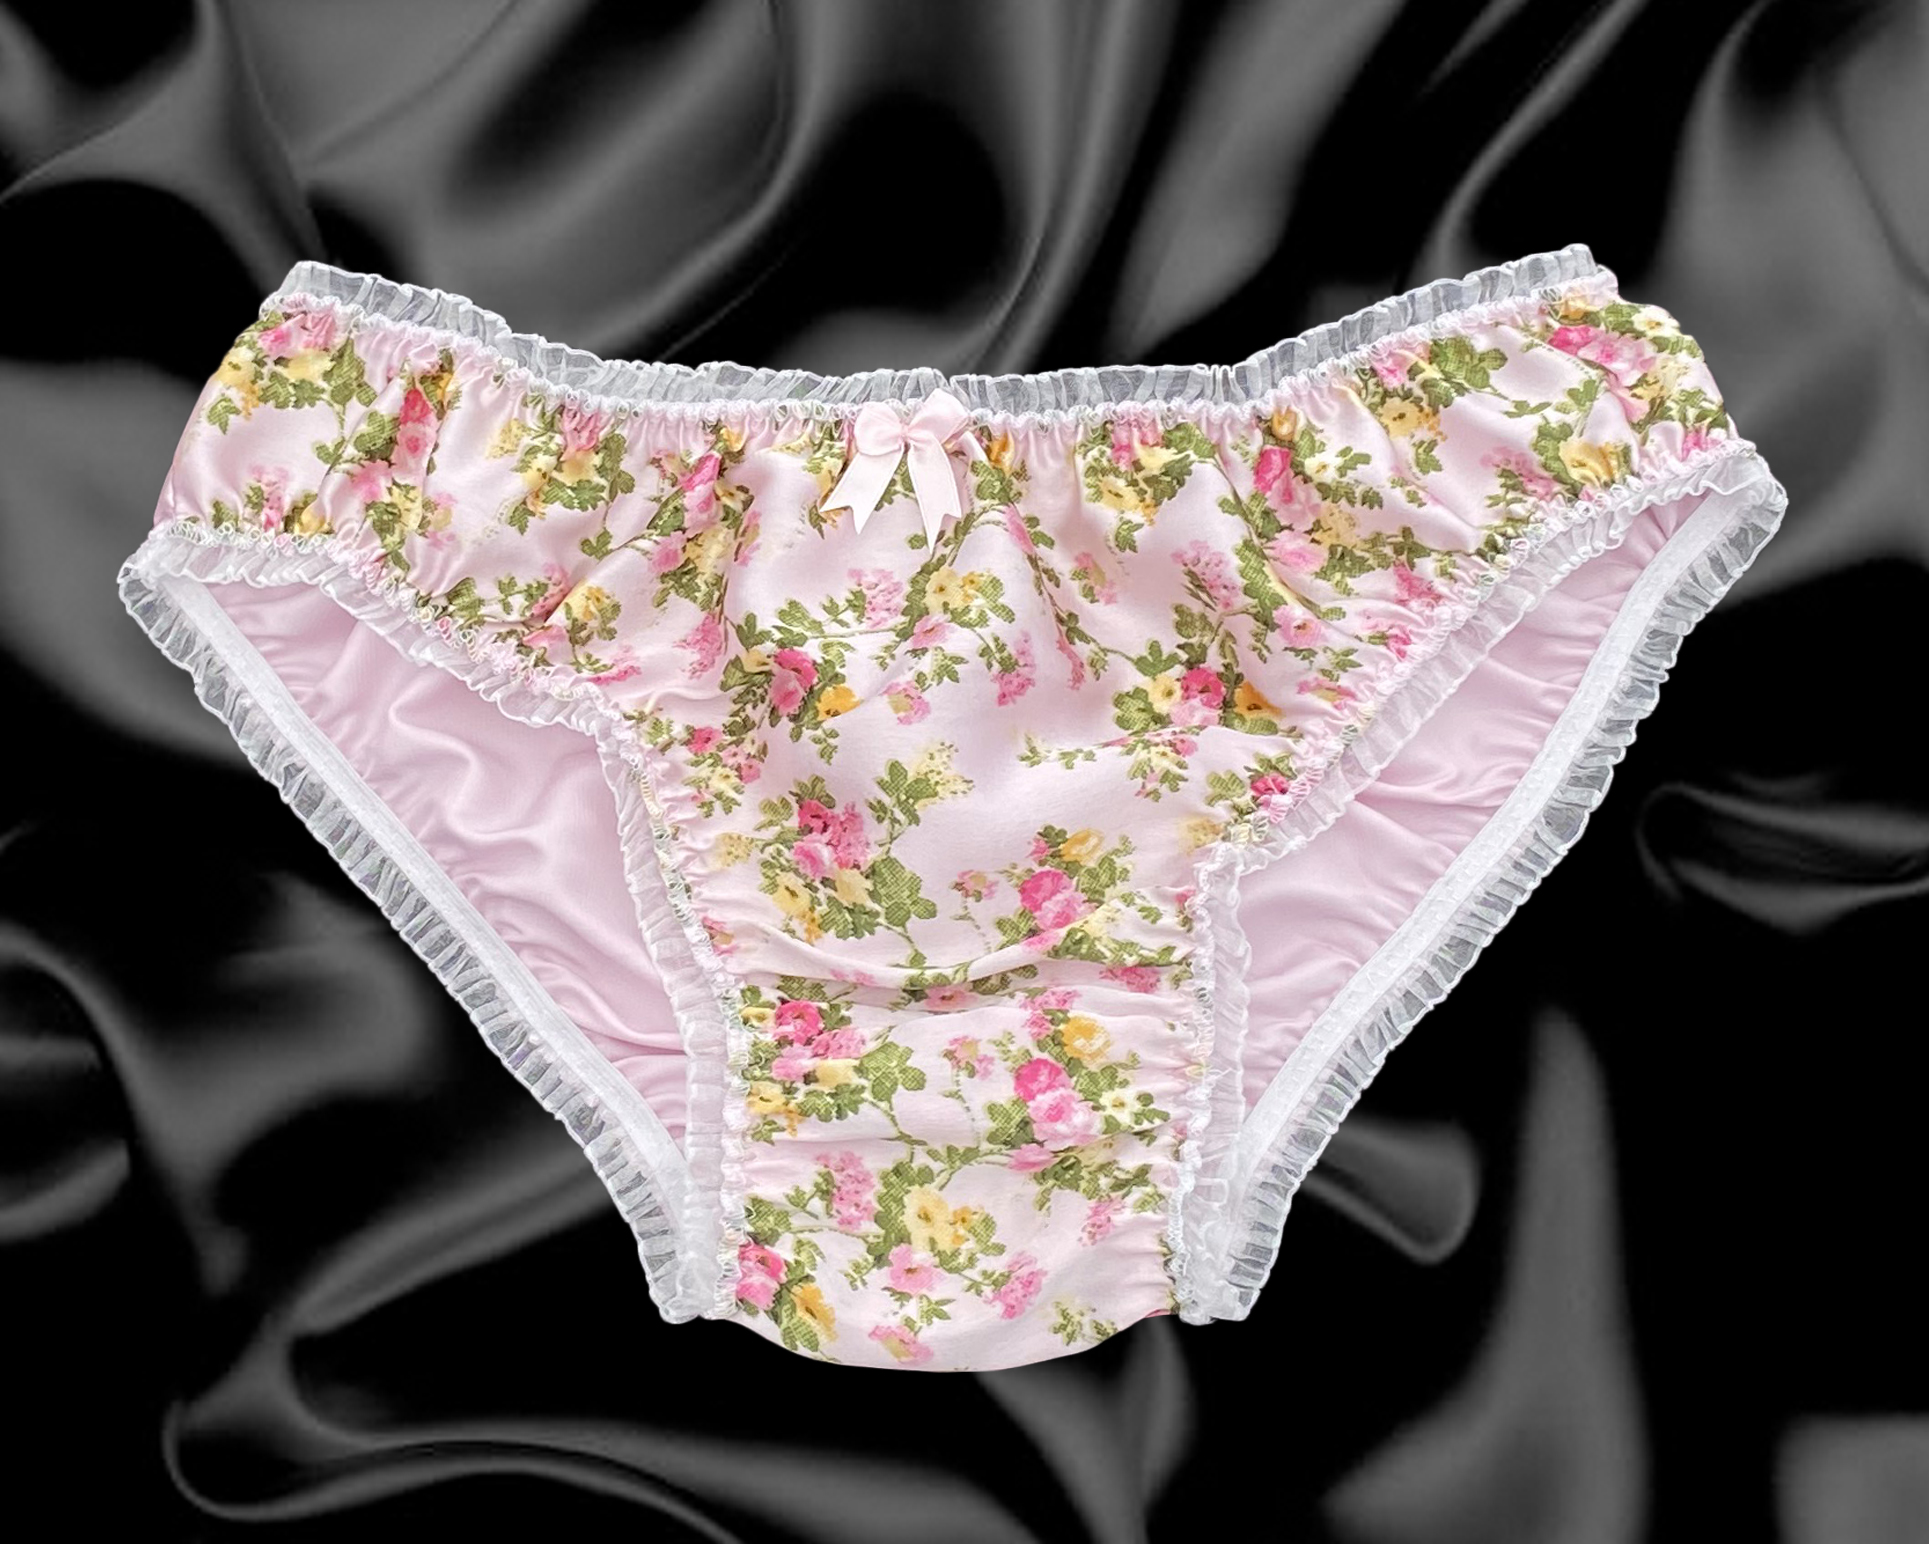 Satin Floral Frilly Lace Sissy Bikini Knickers Briefs Full Panties Size 10  - 20